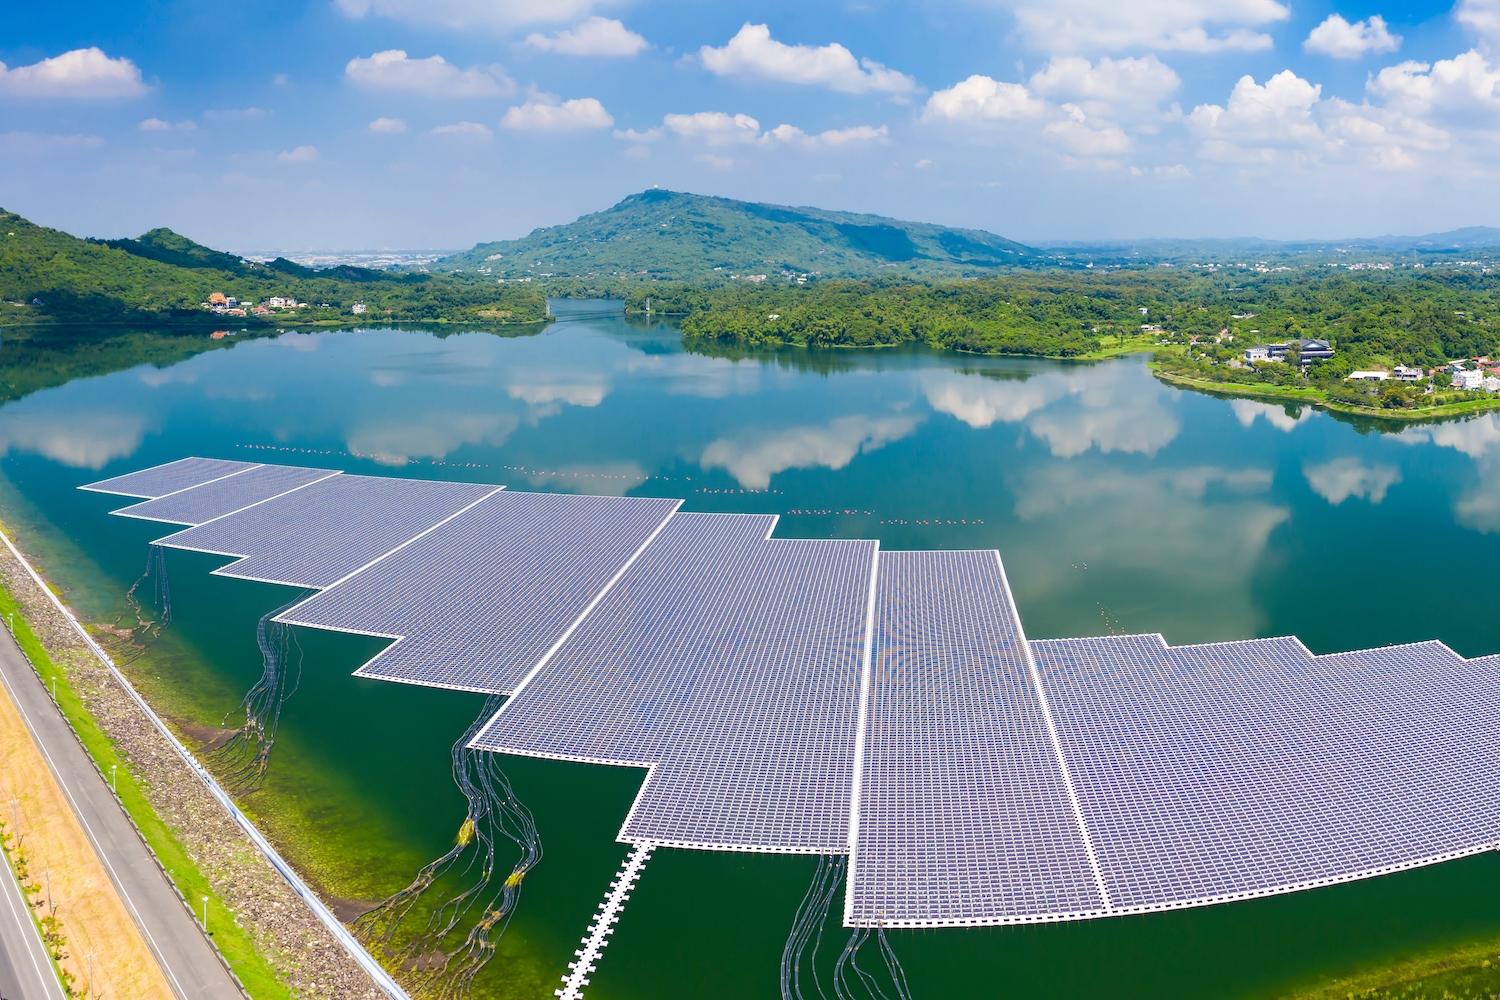 Floating solar farm on a lake in the mountains - environmental solutions